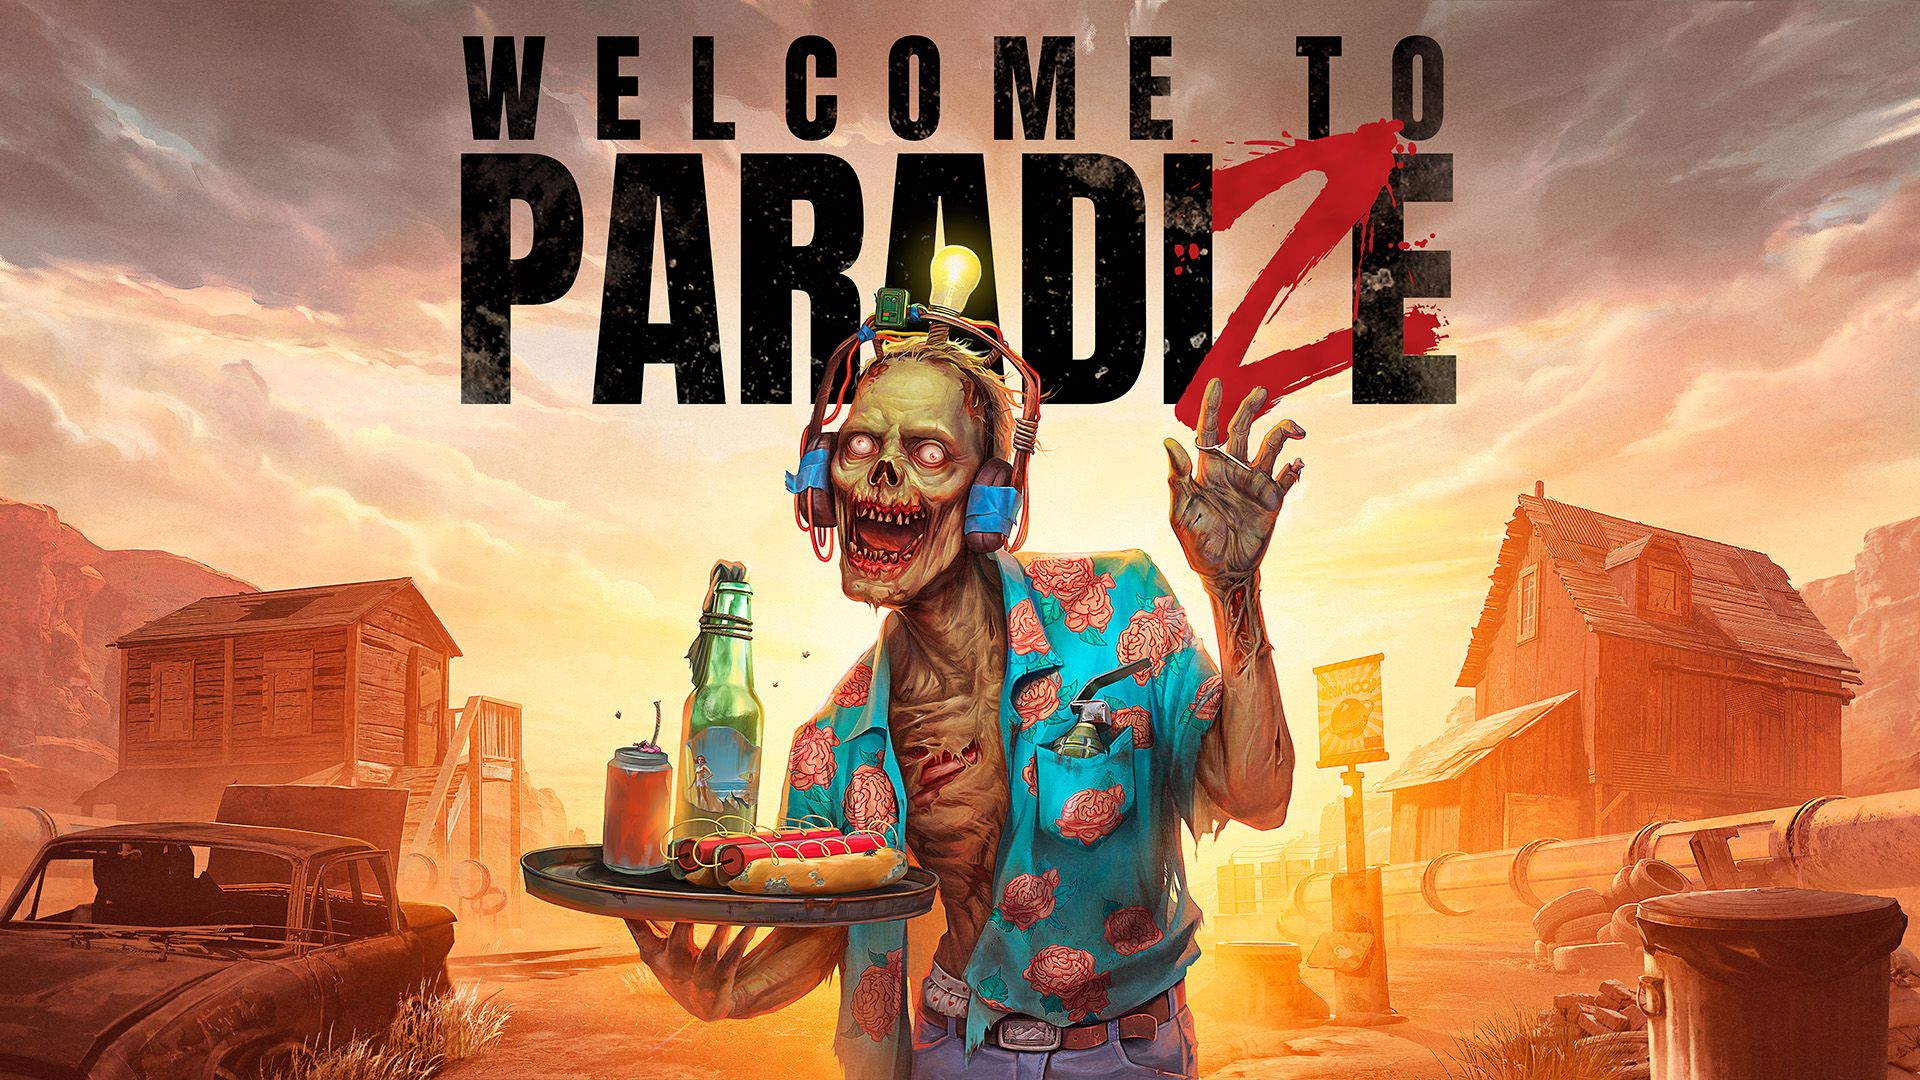 Welcome to ParadiZe - Neues Gameplay-Video